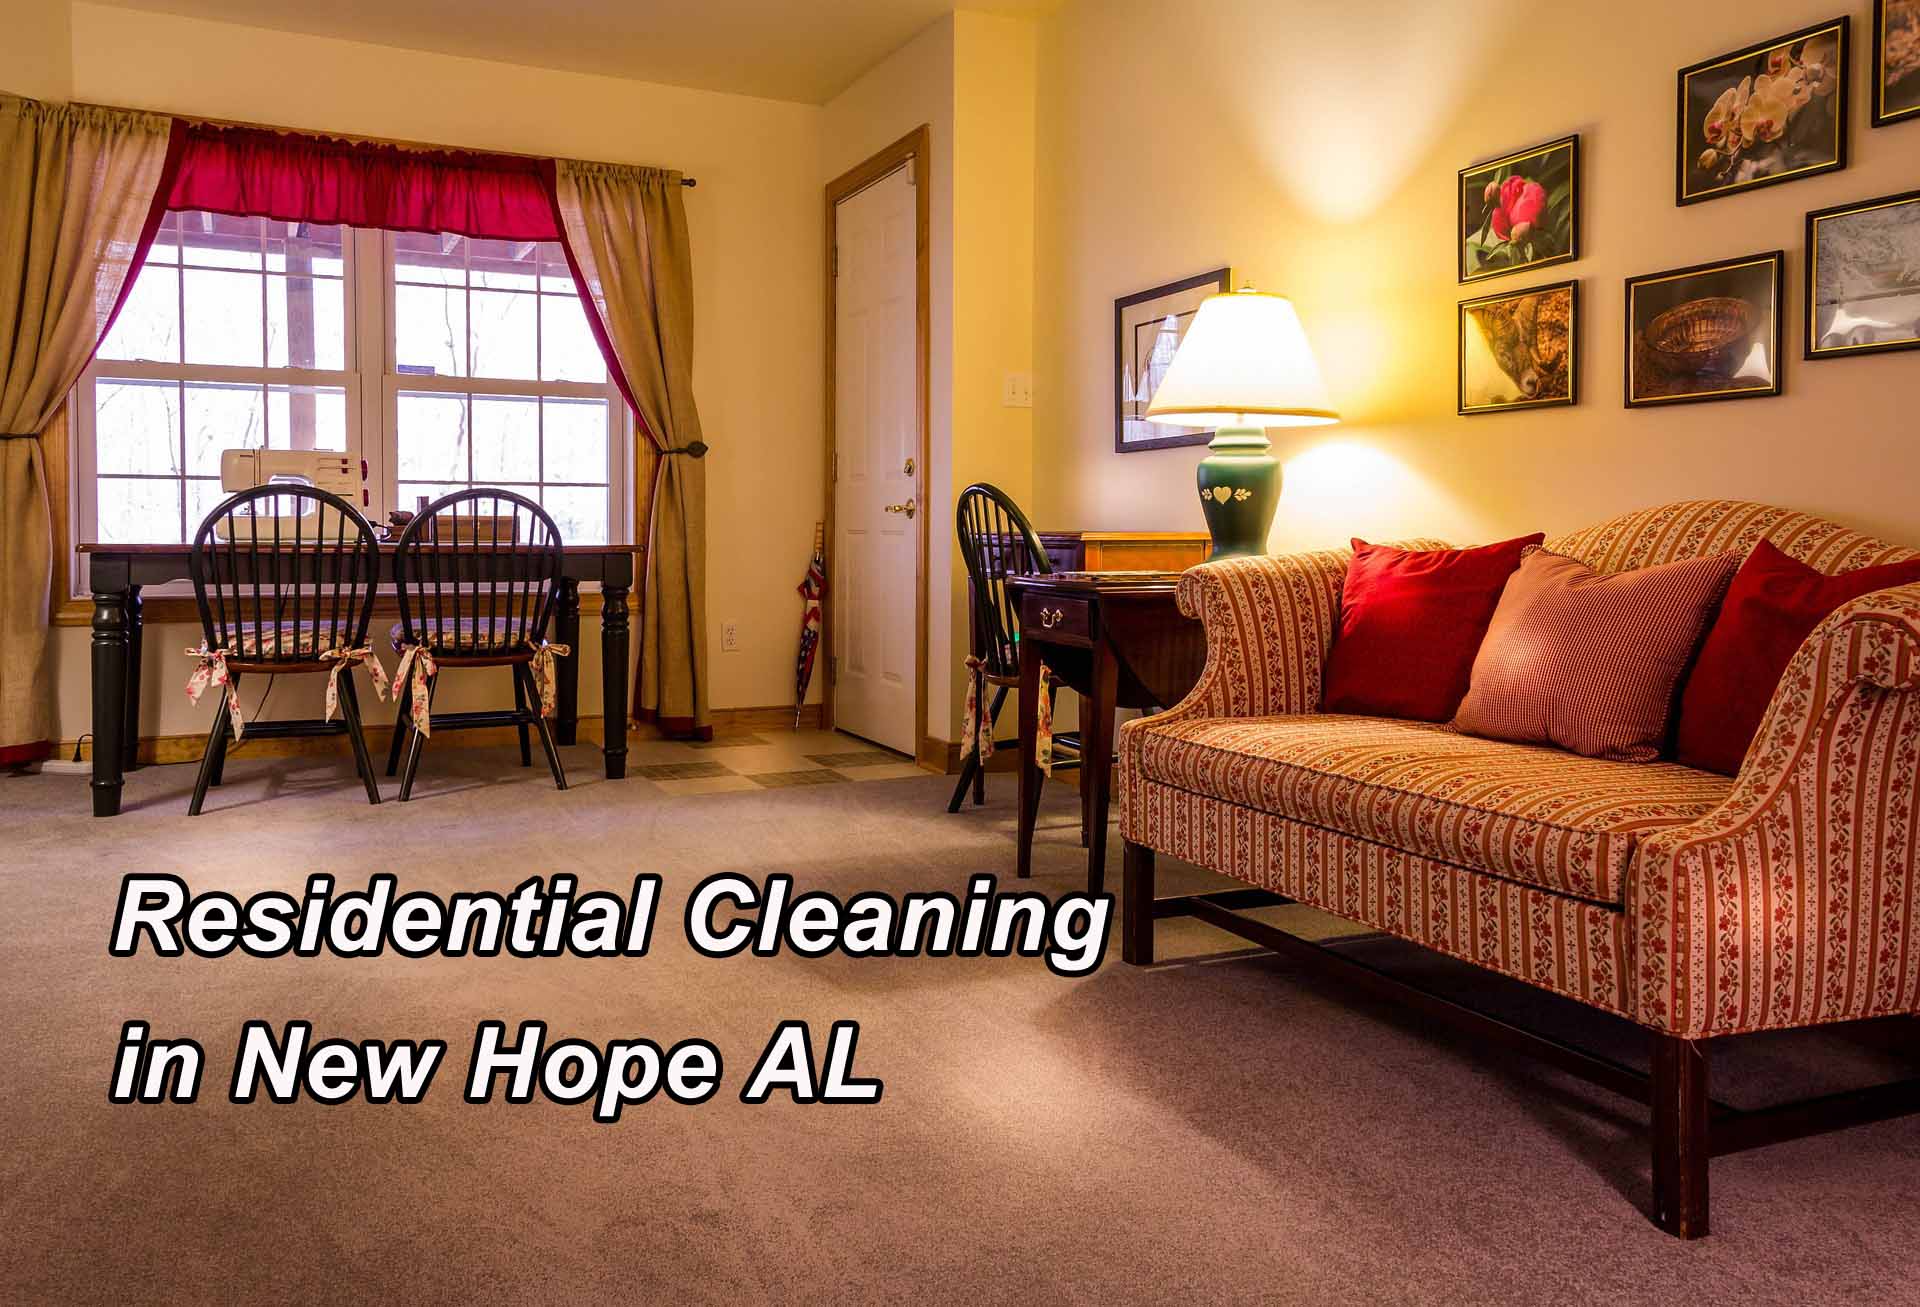 Residential Cleaning in New Hope AL